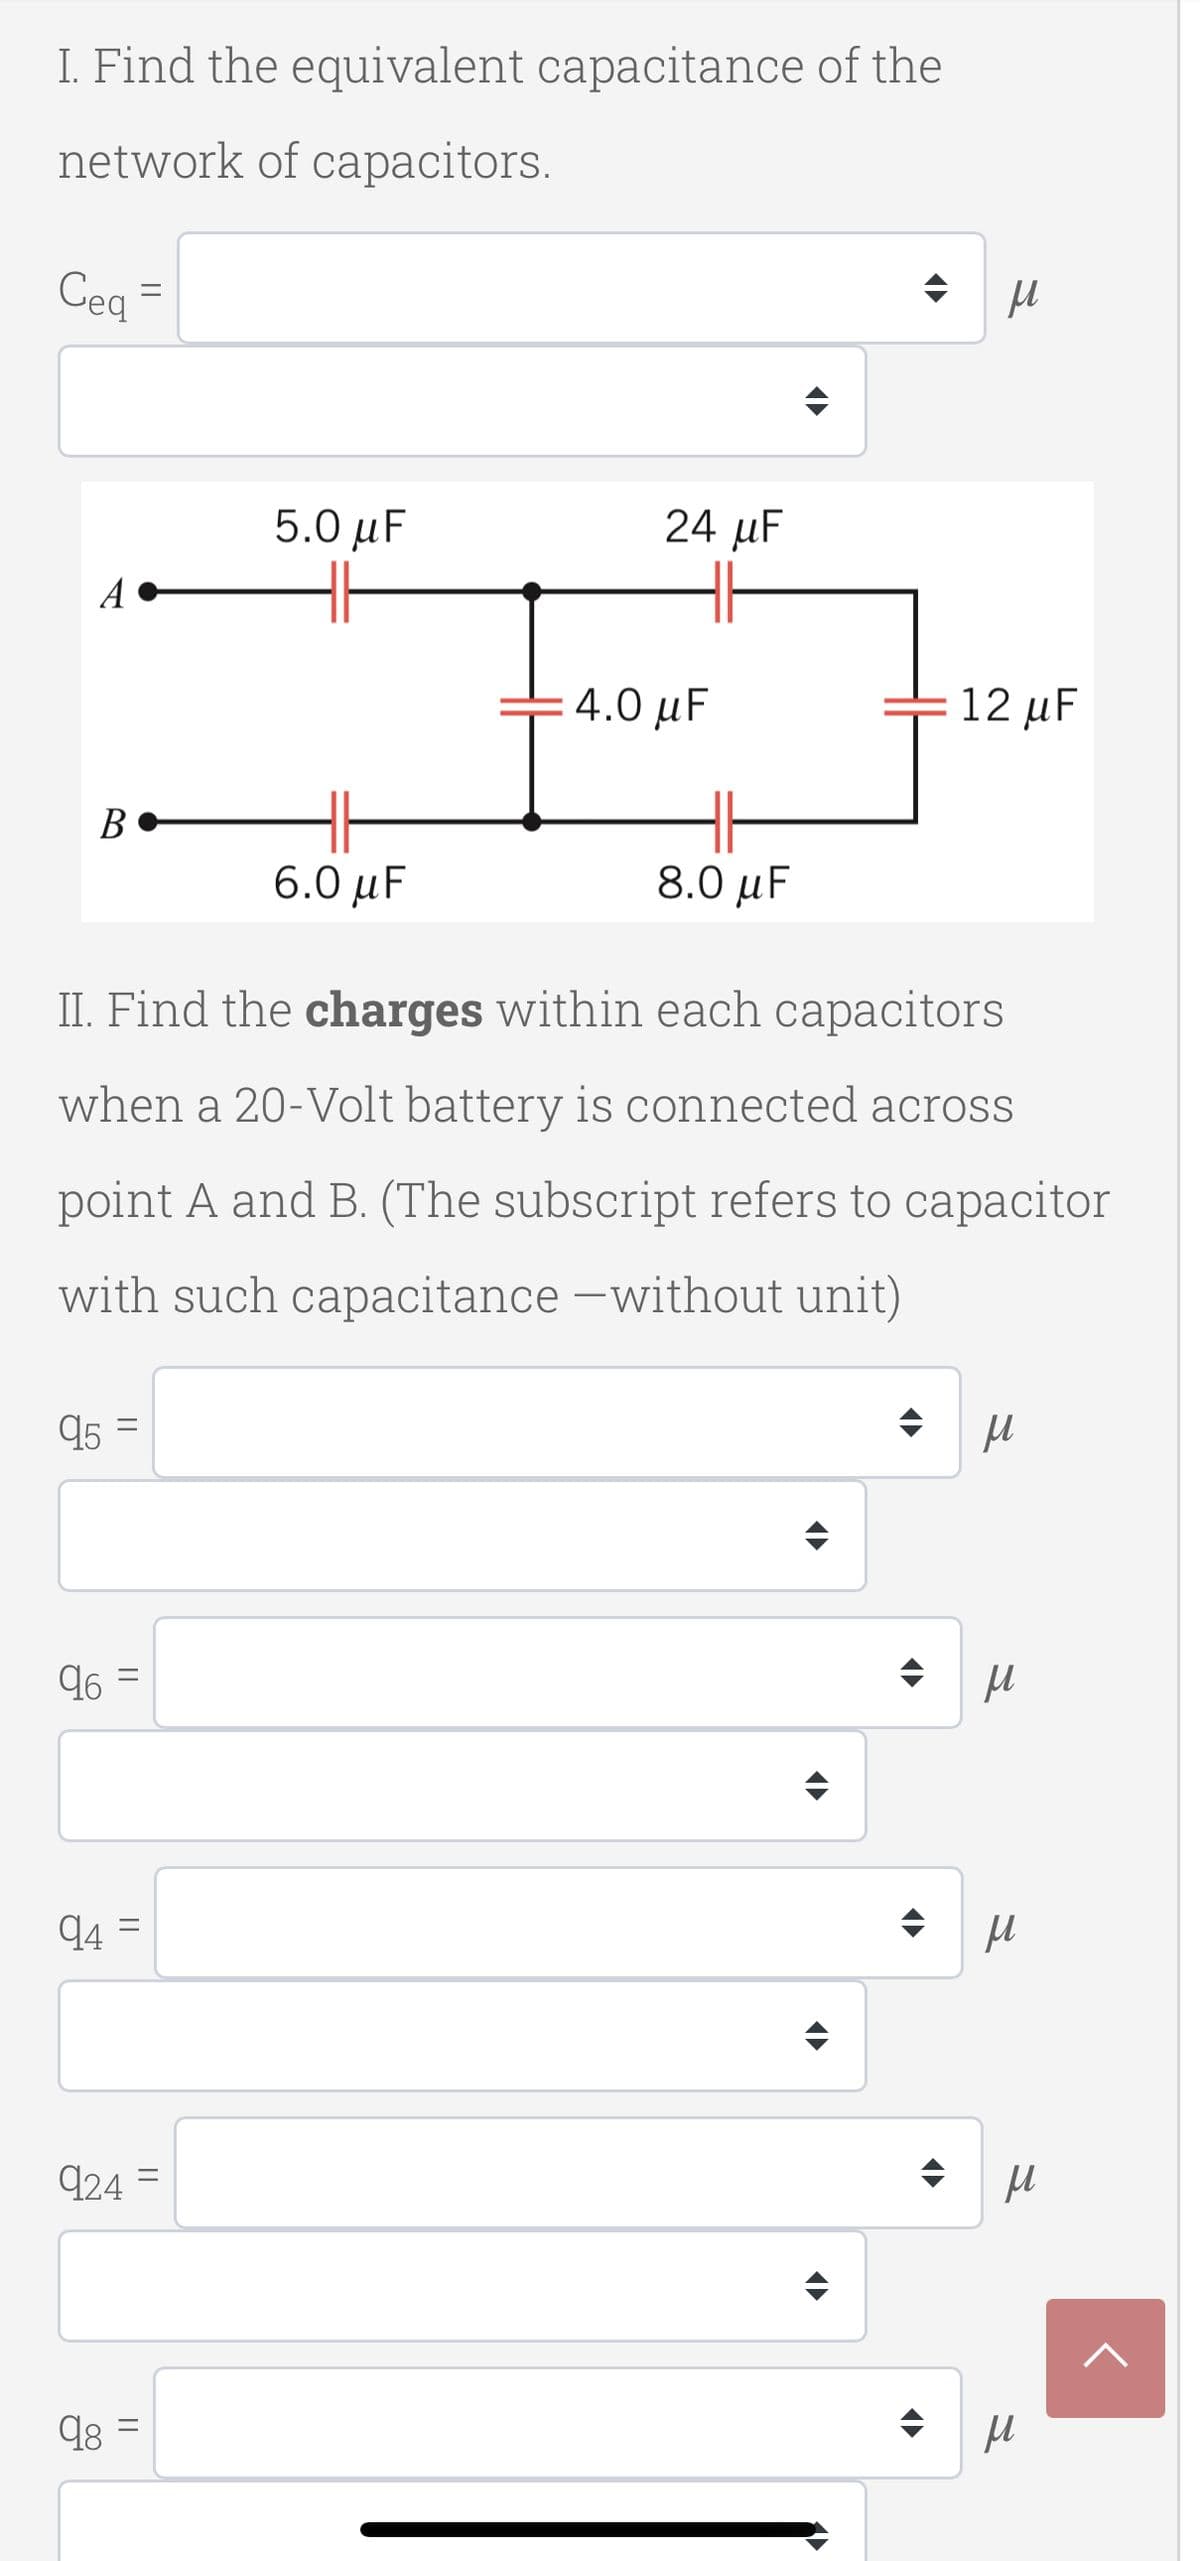 I. Find the equivalent capacitance of the
network of capacitors.
Cea
5.0 μ
24 μ
A
4.0 µF
12 μF
B•
6.0 μF.
8.0 μ
II. Find the charges within each capacitors
when a 20-Volt battery is connected across
point A and B. (The subscript refers to capacitor
with such capacitance -without unit)
q5 =
96 =
q4 =
924
||
||
||
